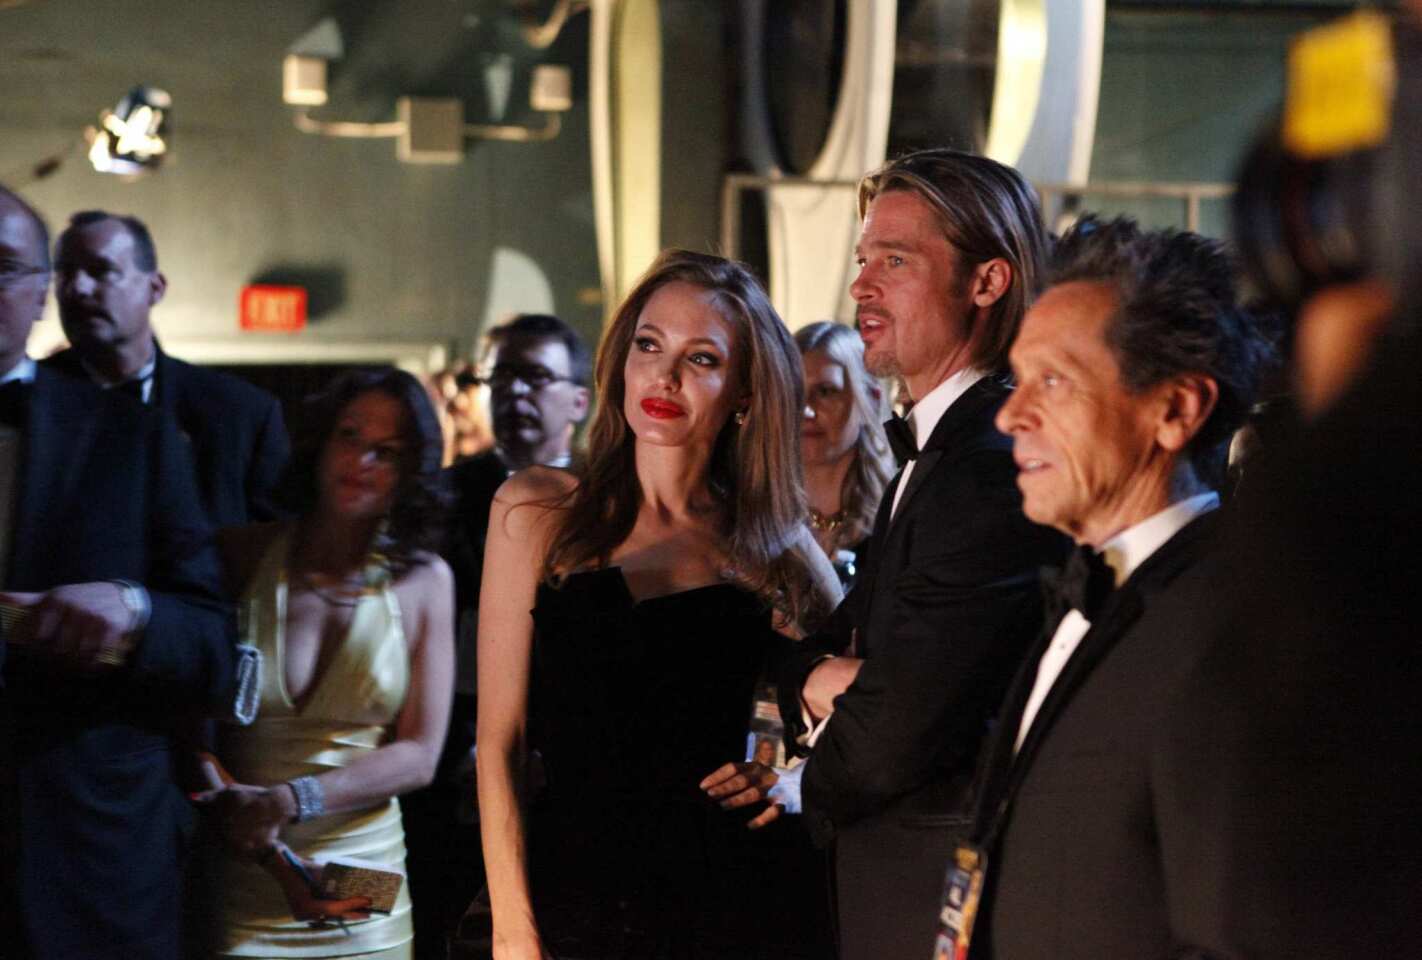 The powerhouse couple watch the show off-stage with the Academy Awards producer. Pitt was nominated Sunday night for his role in 'Moneyball."